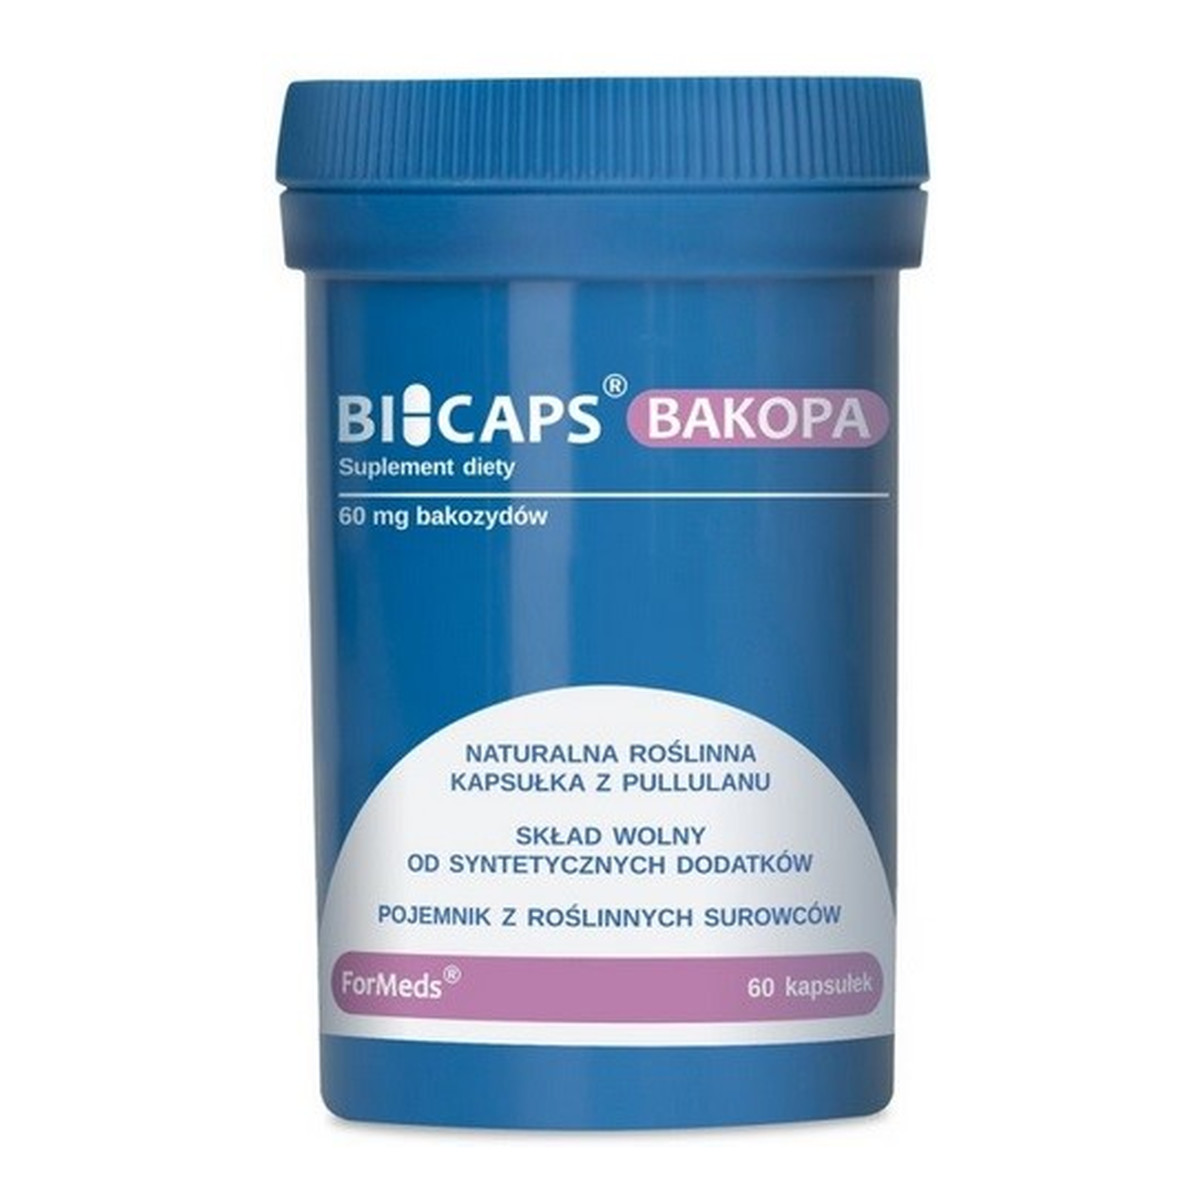 Formeds Bicaps bacopa bakozydy 60mg suplement diety 60 kapsułek